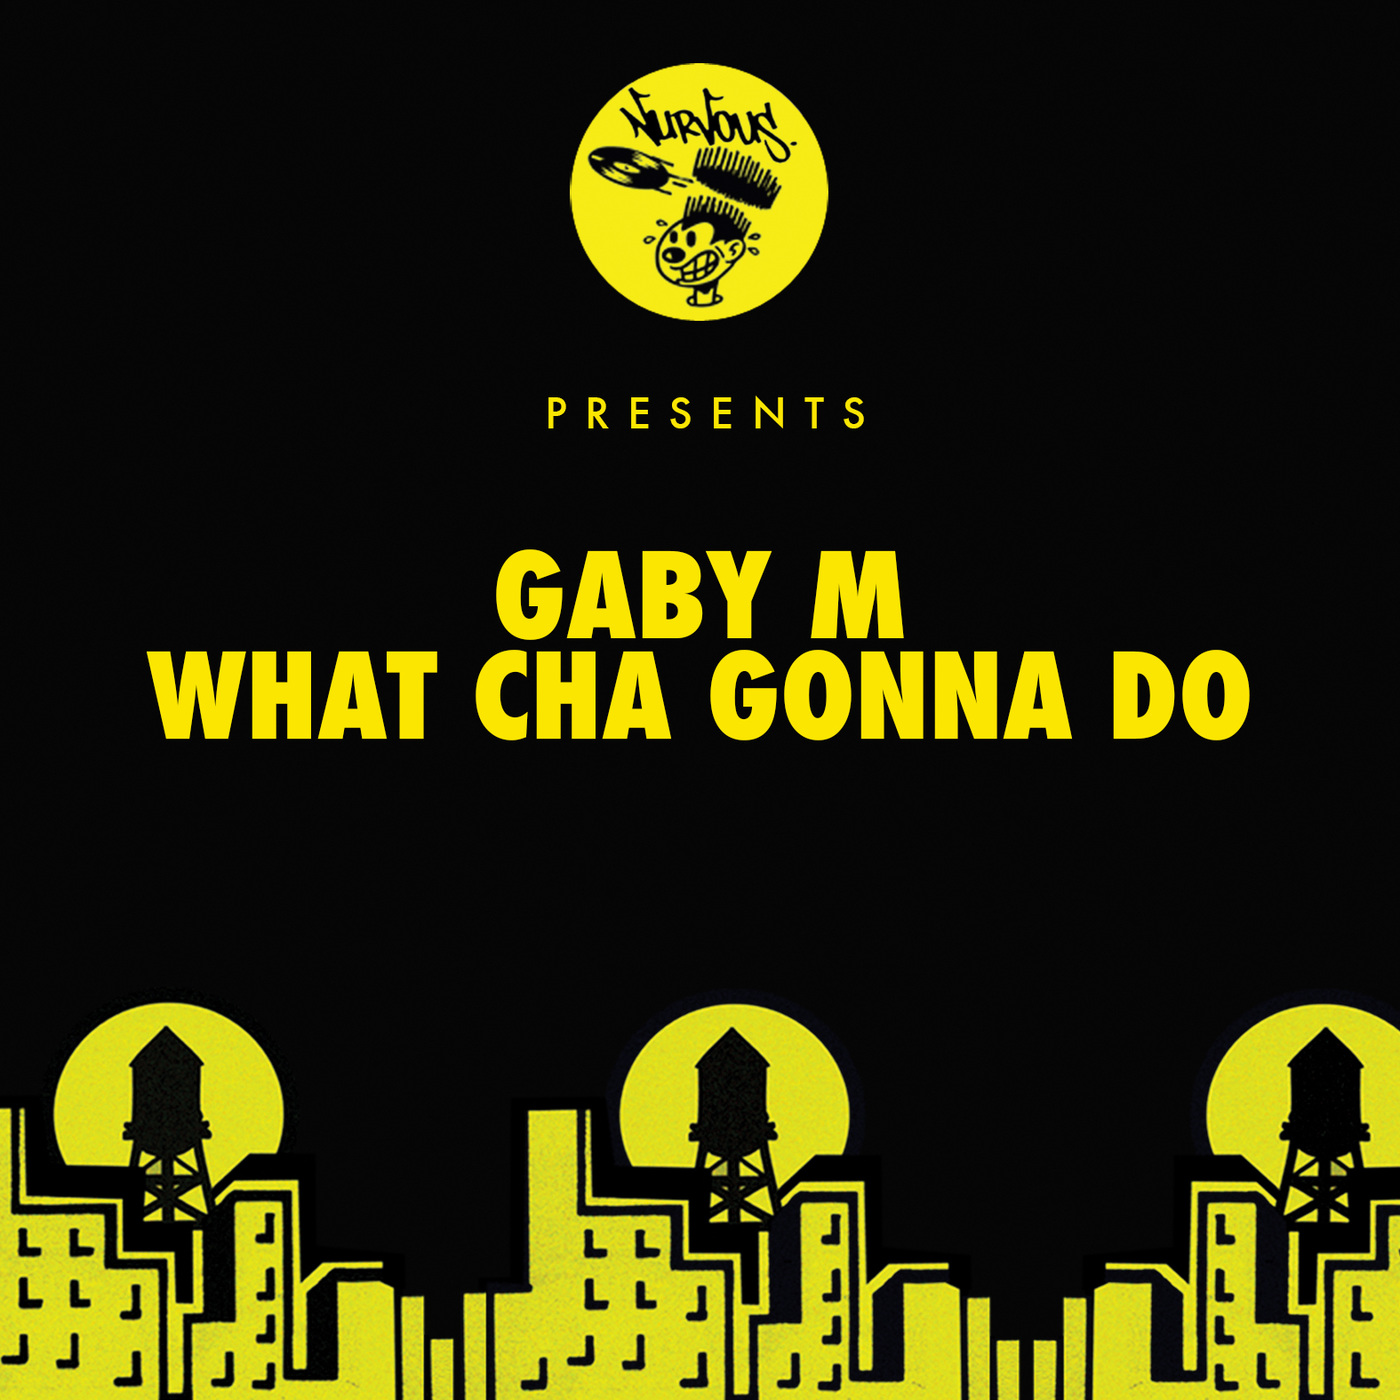 Gaby M - What Cha Gonna Do / Nurvous Records